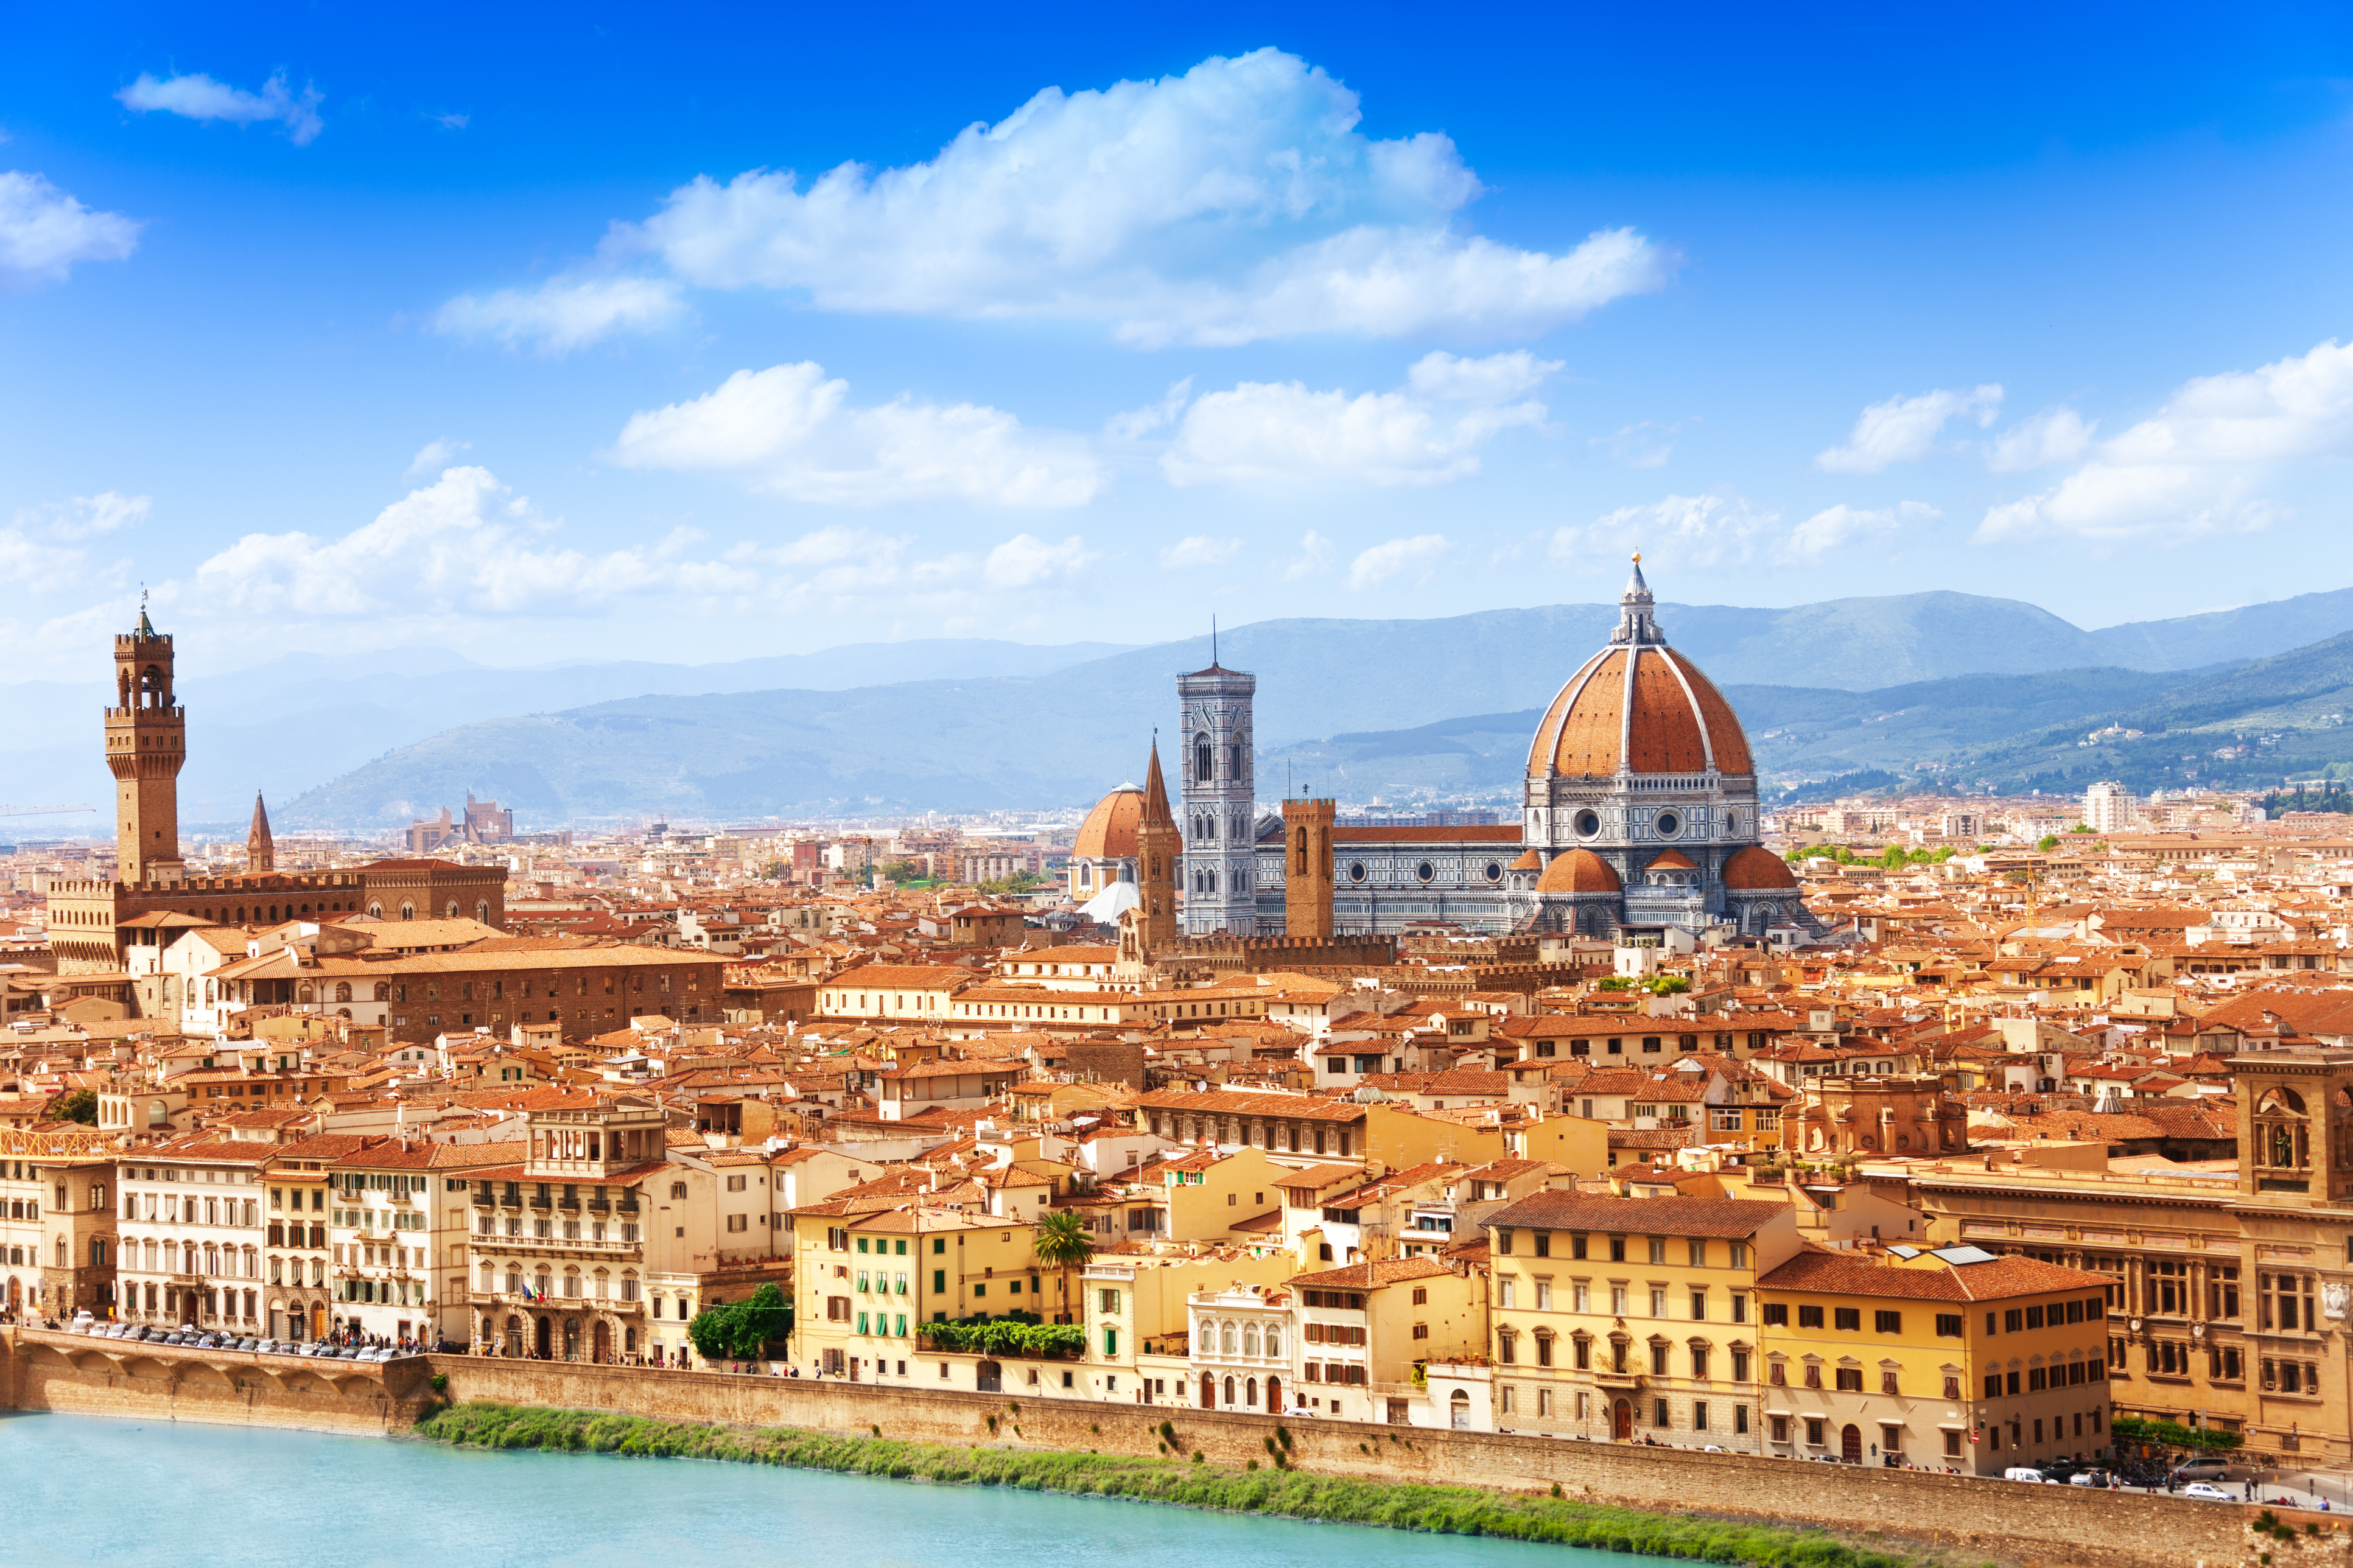 Study food culture in Italy, learn how to make traditional Italian dishes, take in the historic sites of Rome, and wander along the canals of Venice. Receive language and culinary training from renowned institutions. Summer study abroad in Italy, Florence